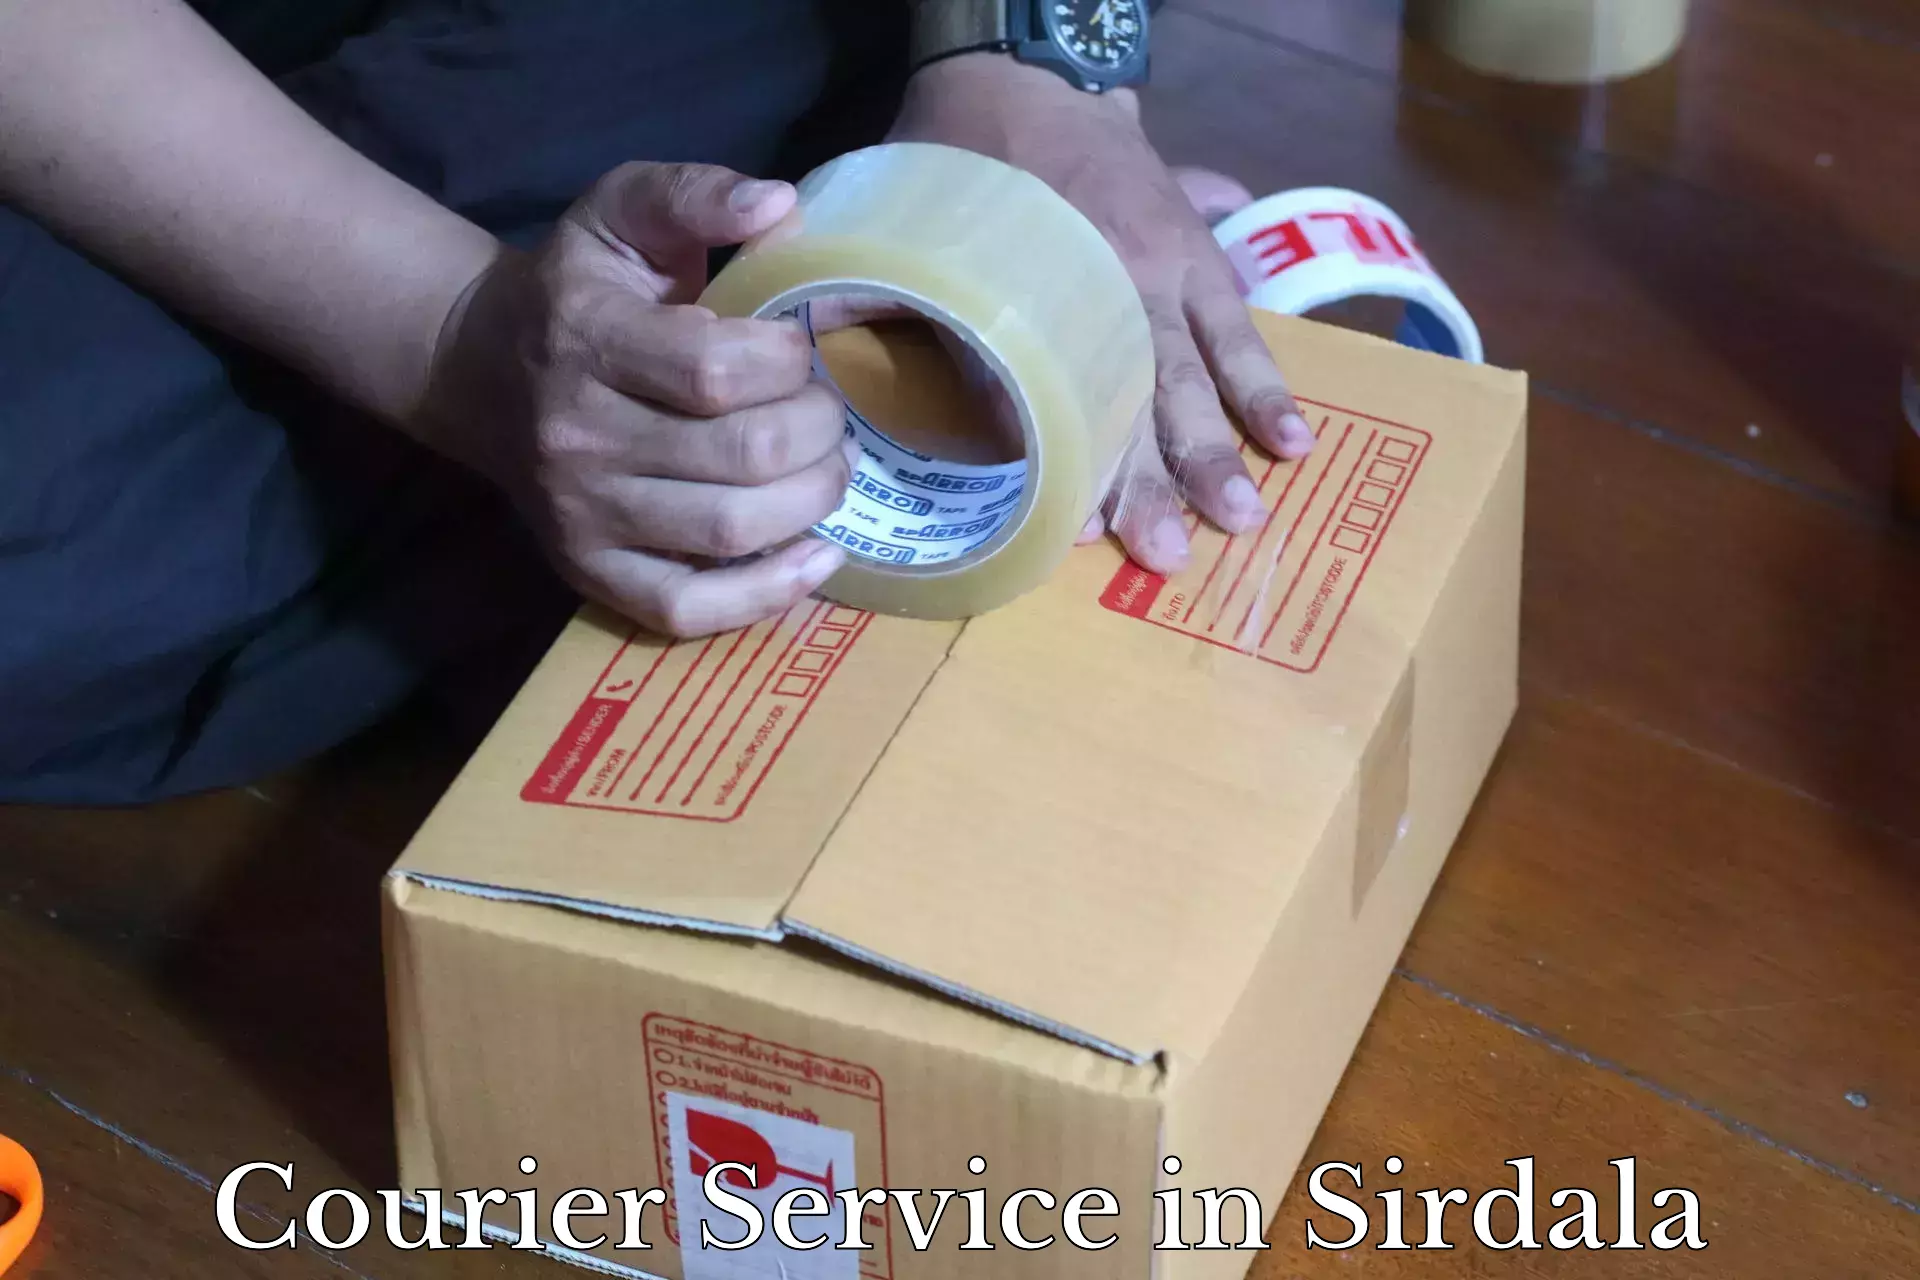 Same-day delivery solutions in Sirdala